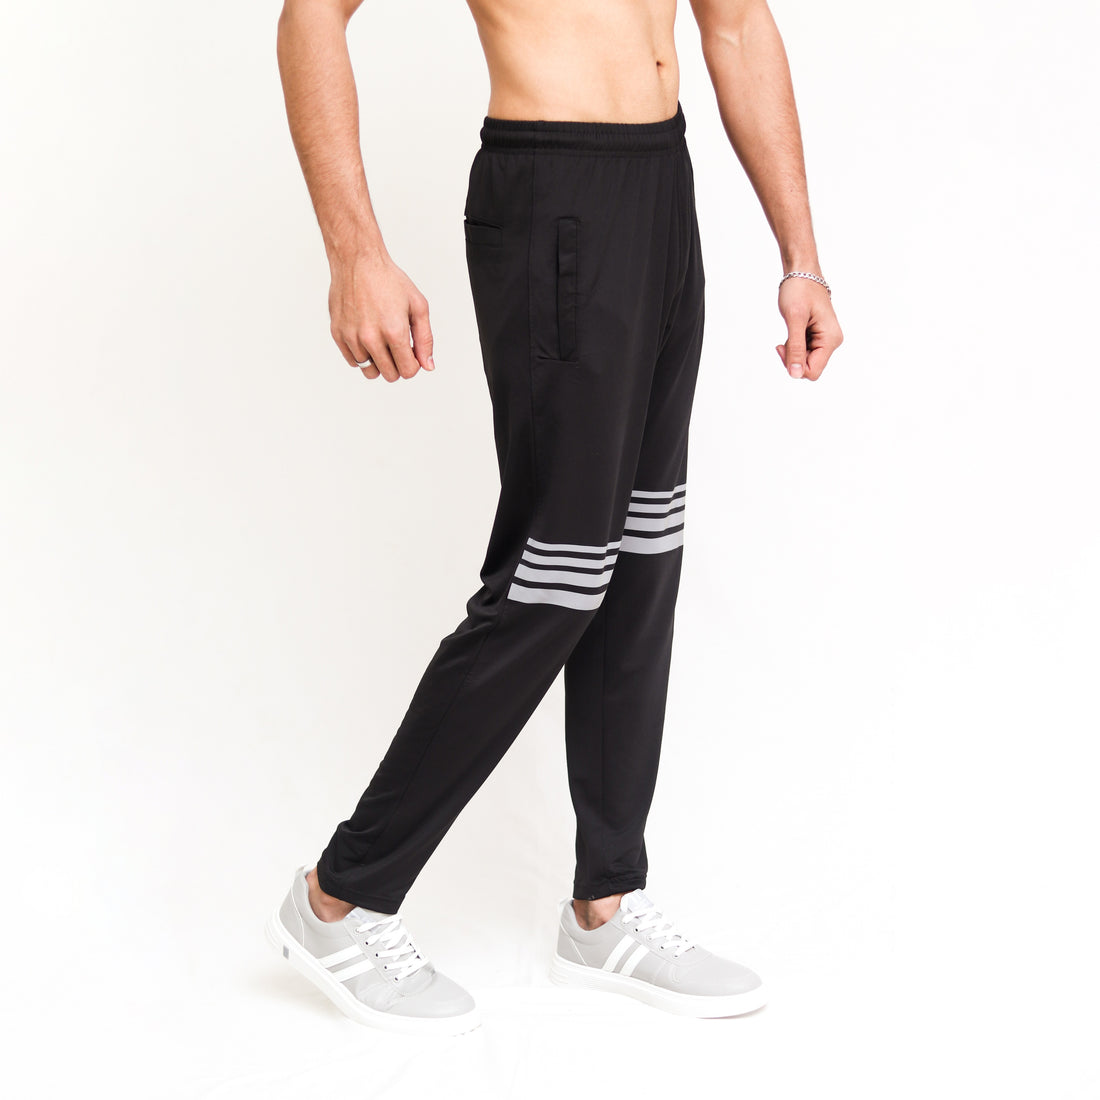 Black Lycra Quick Dry Trouser with Four Stripes